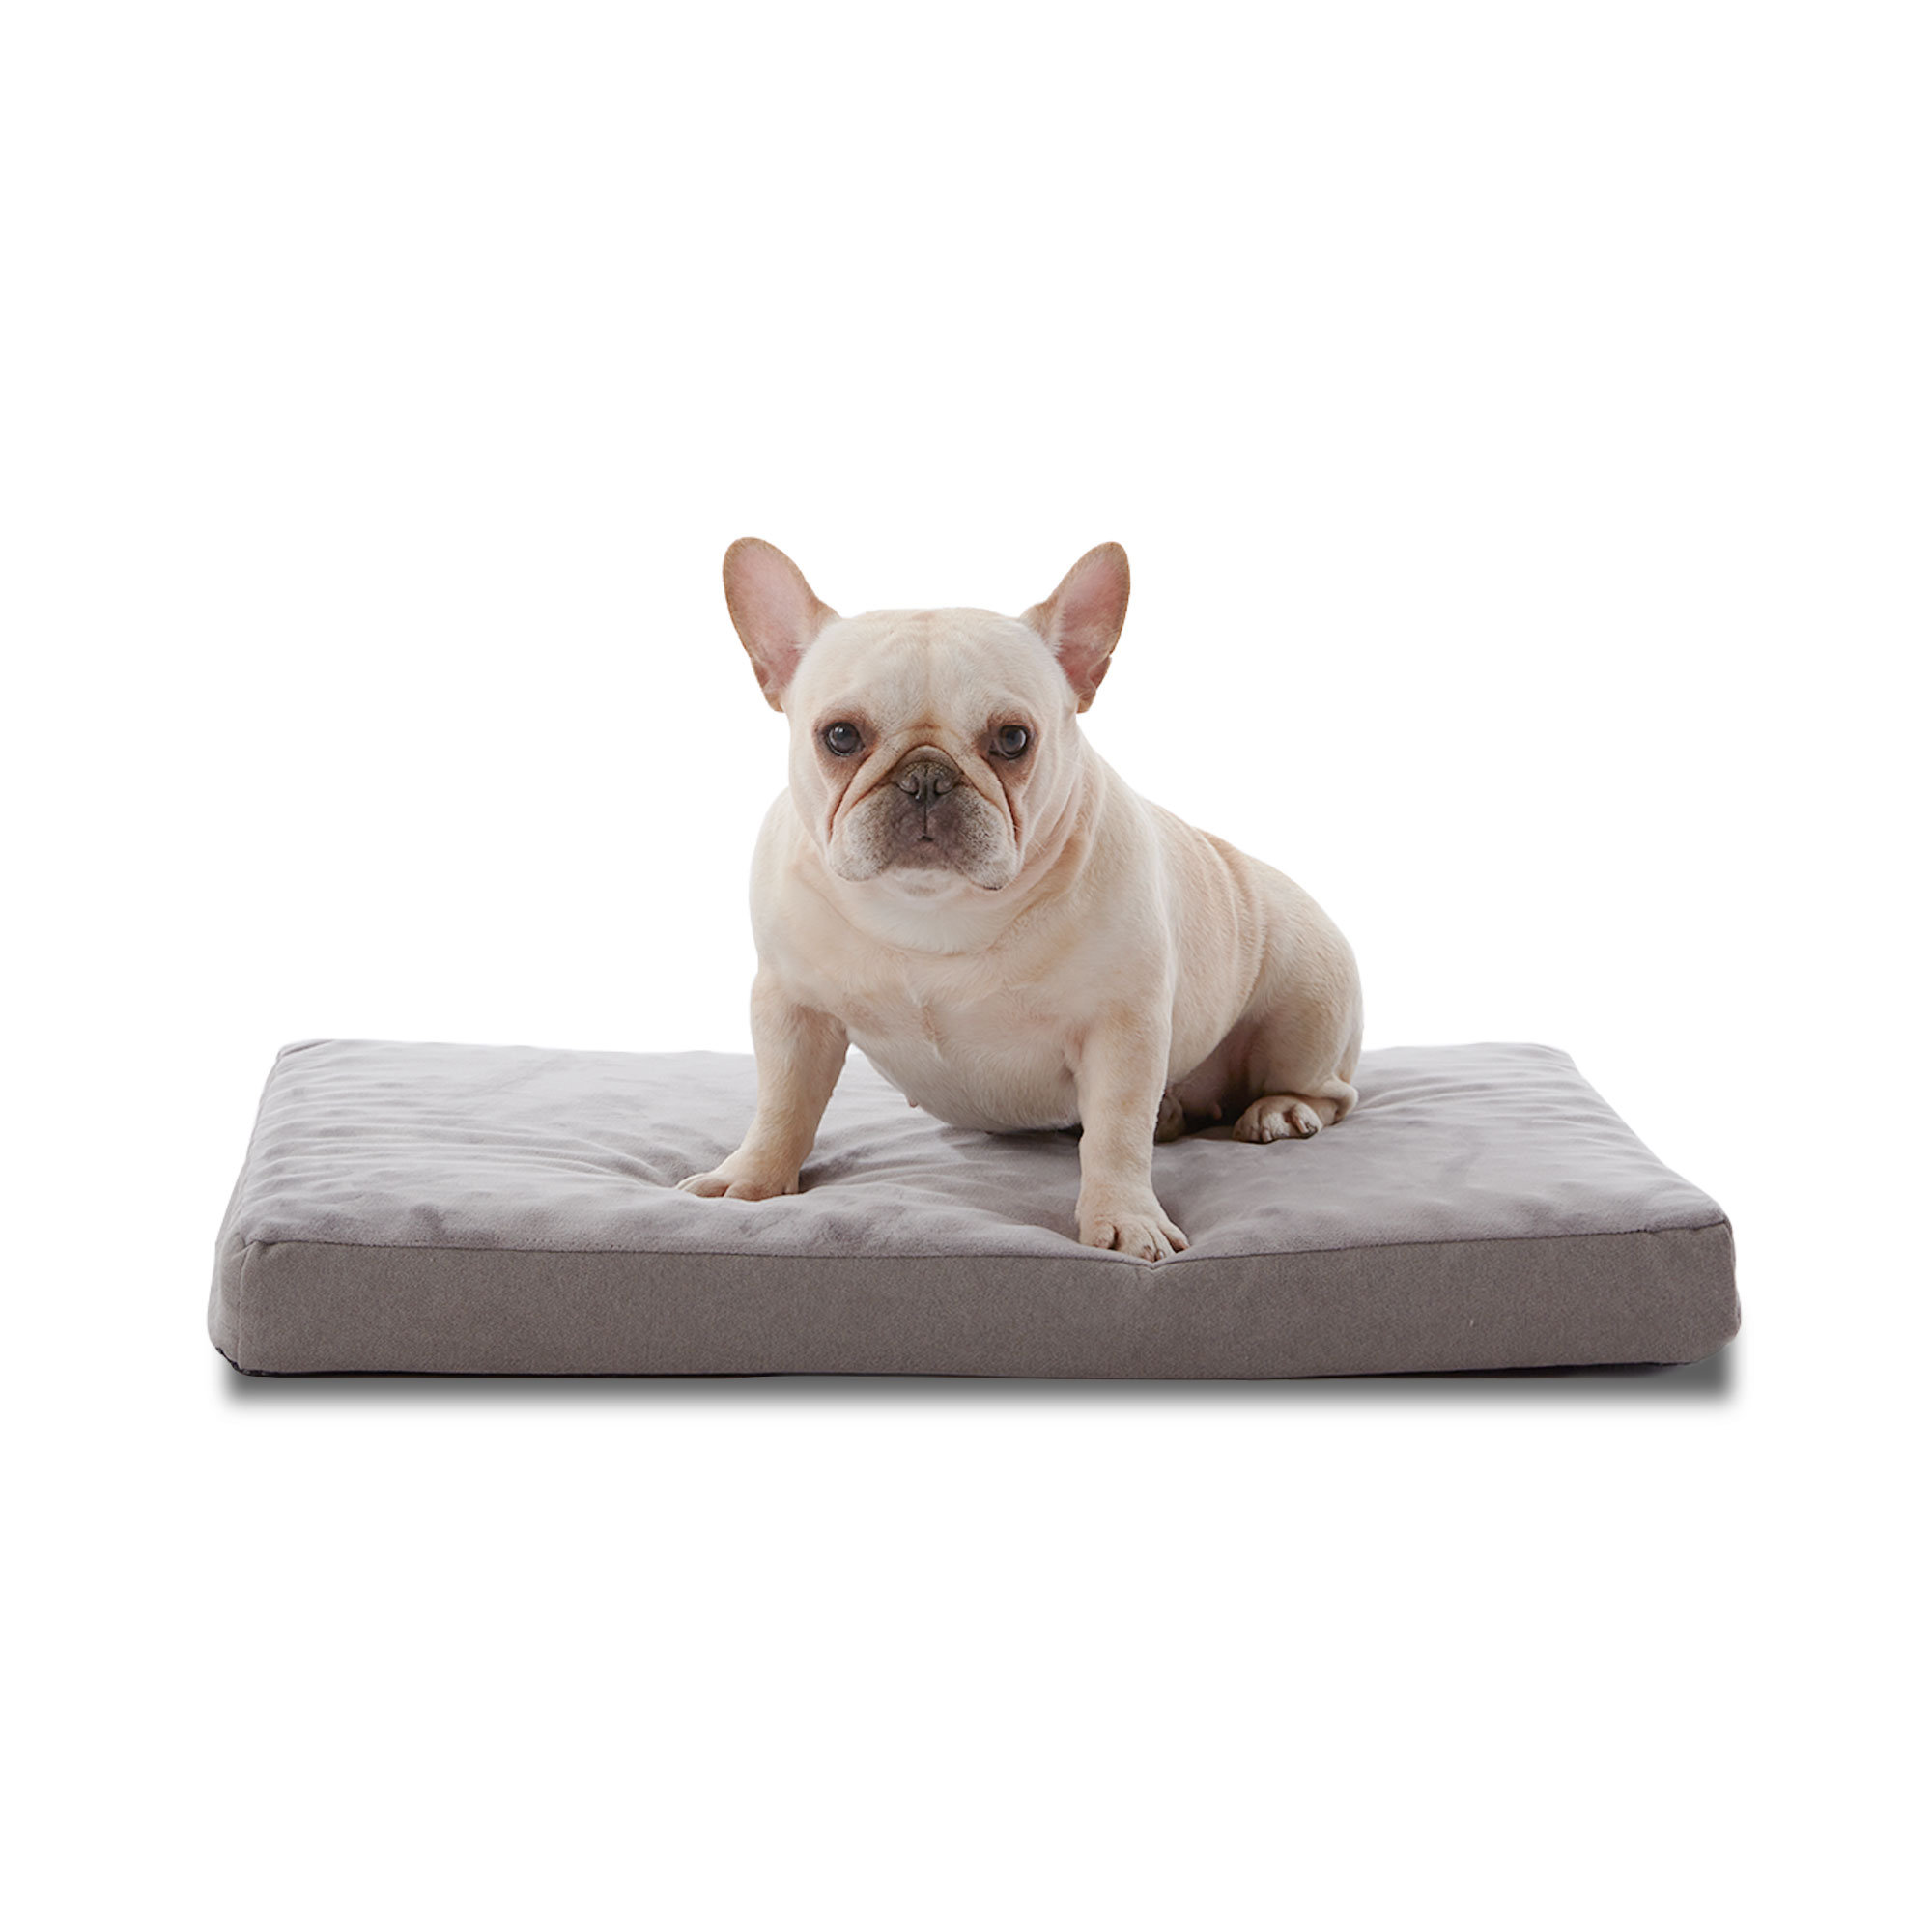 Washable Incontinence Bed Pads (72 x 36) for Adults, Kids, Dogs